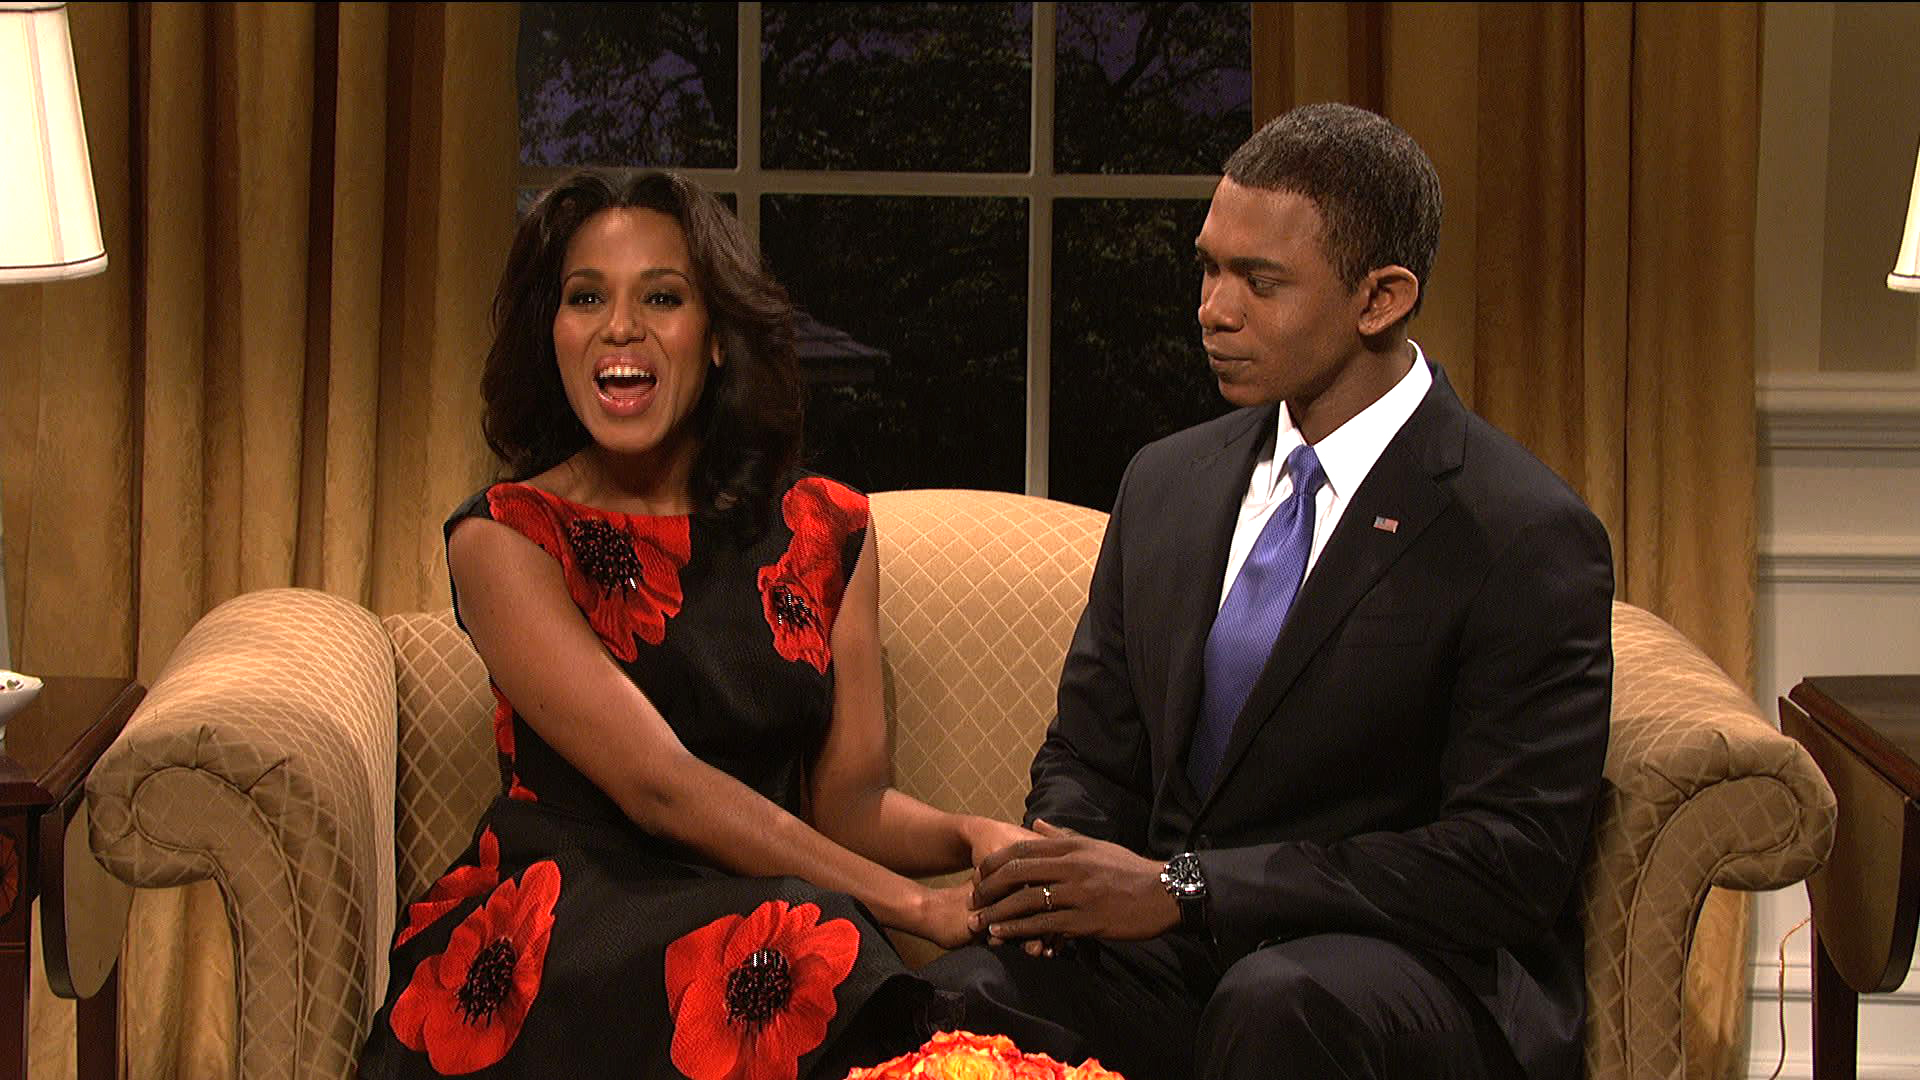 Watch Black Women on SNL and in the White House From Saturday Night Live - NBC.com1920 x 1080